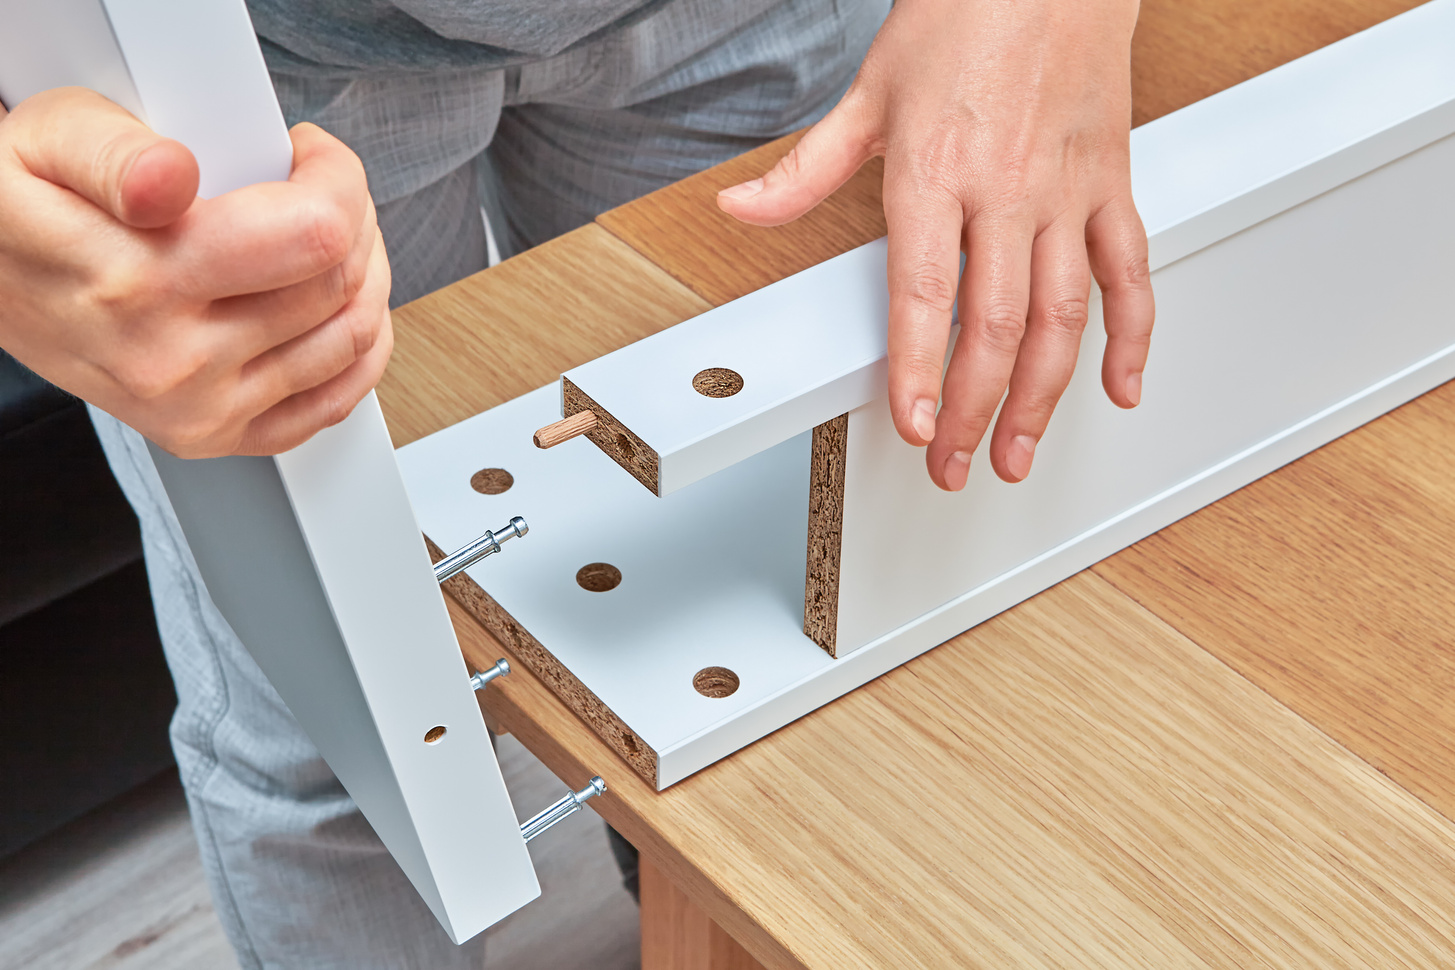 Furniture assembler connects parts of table, furniture assembly.